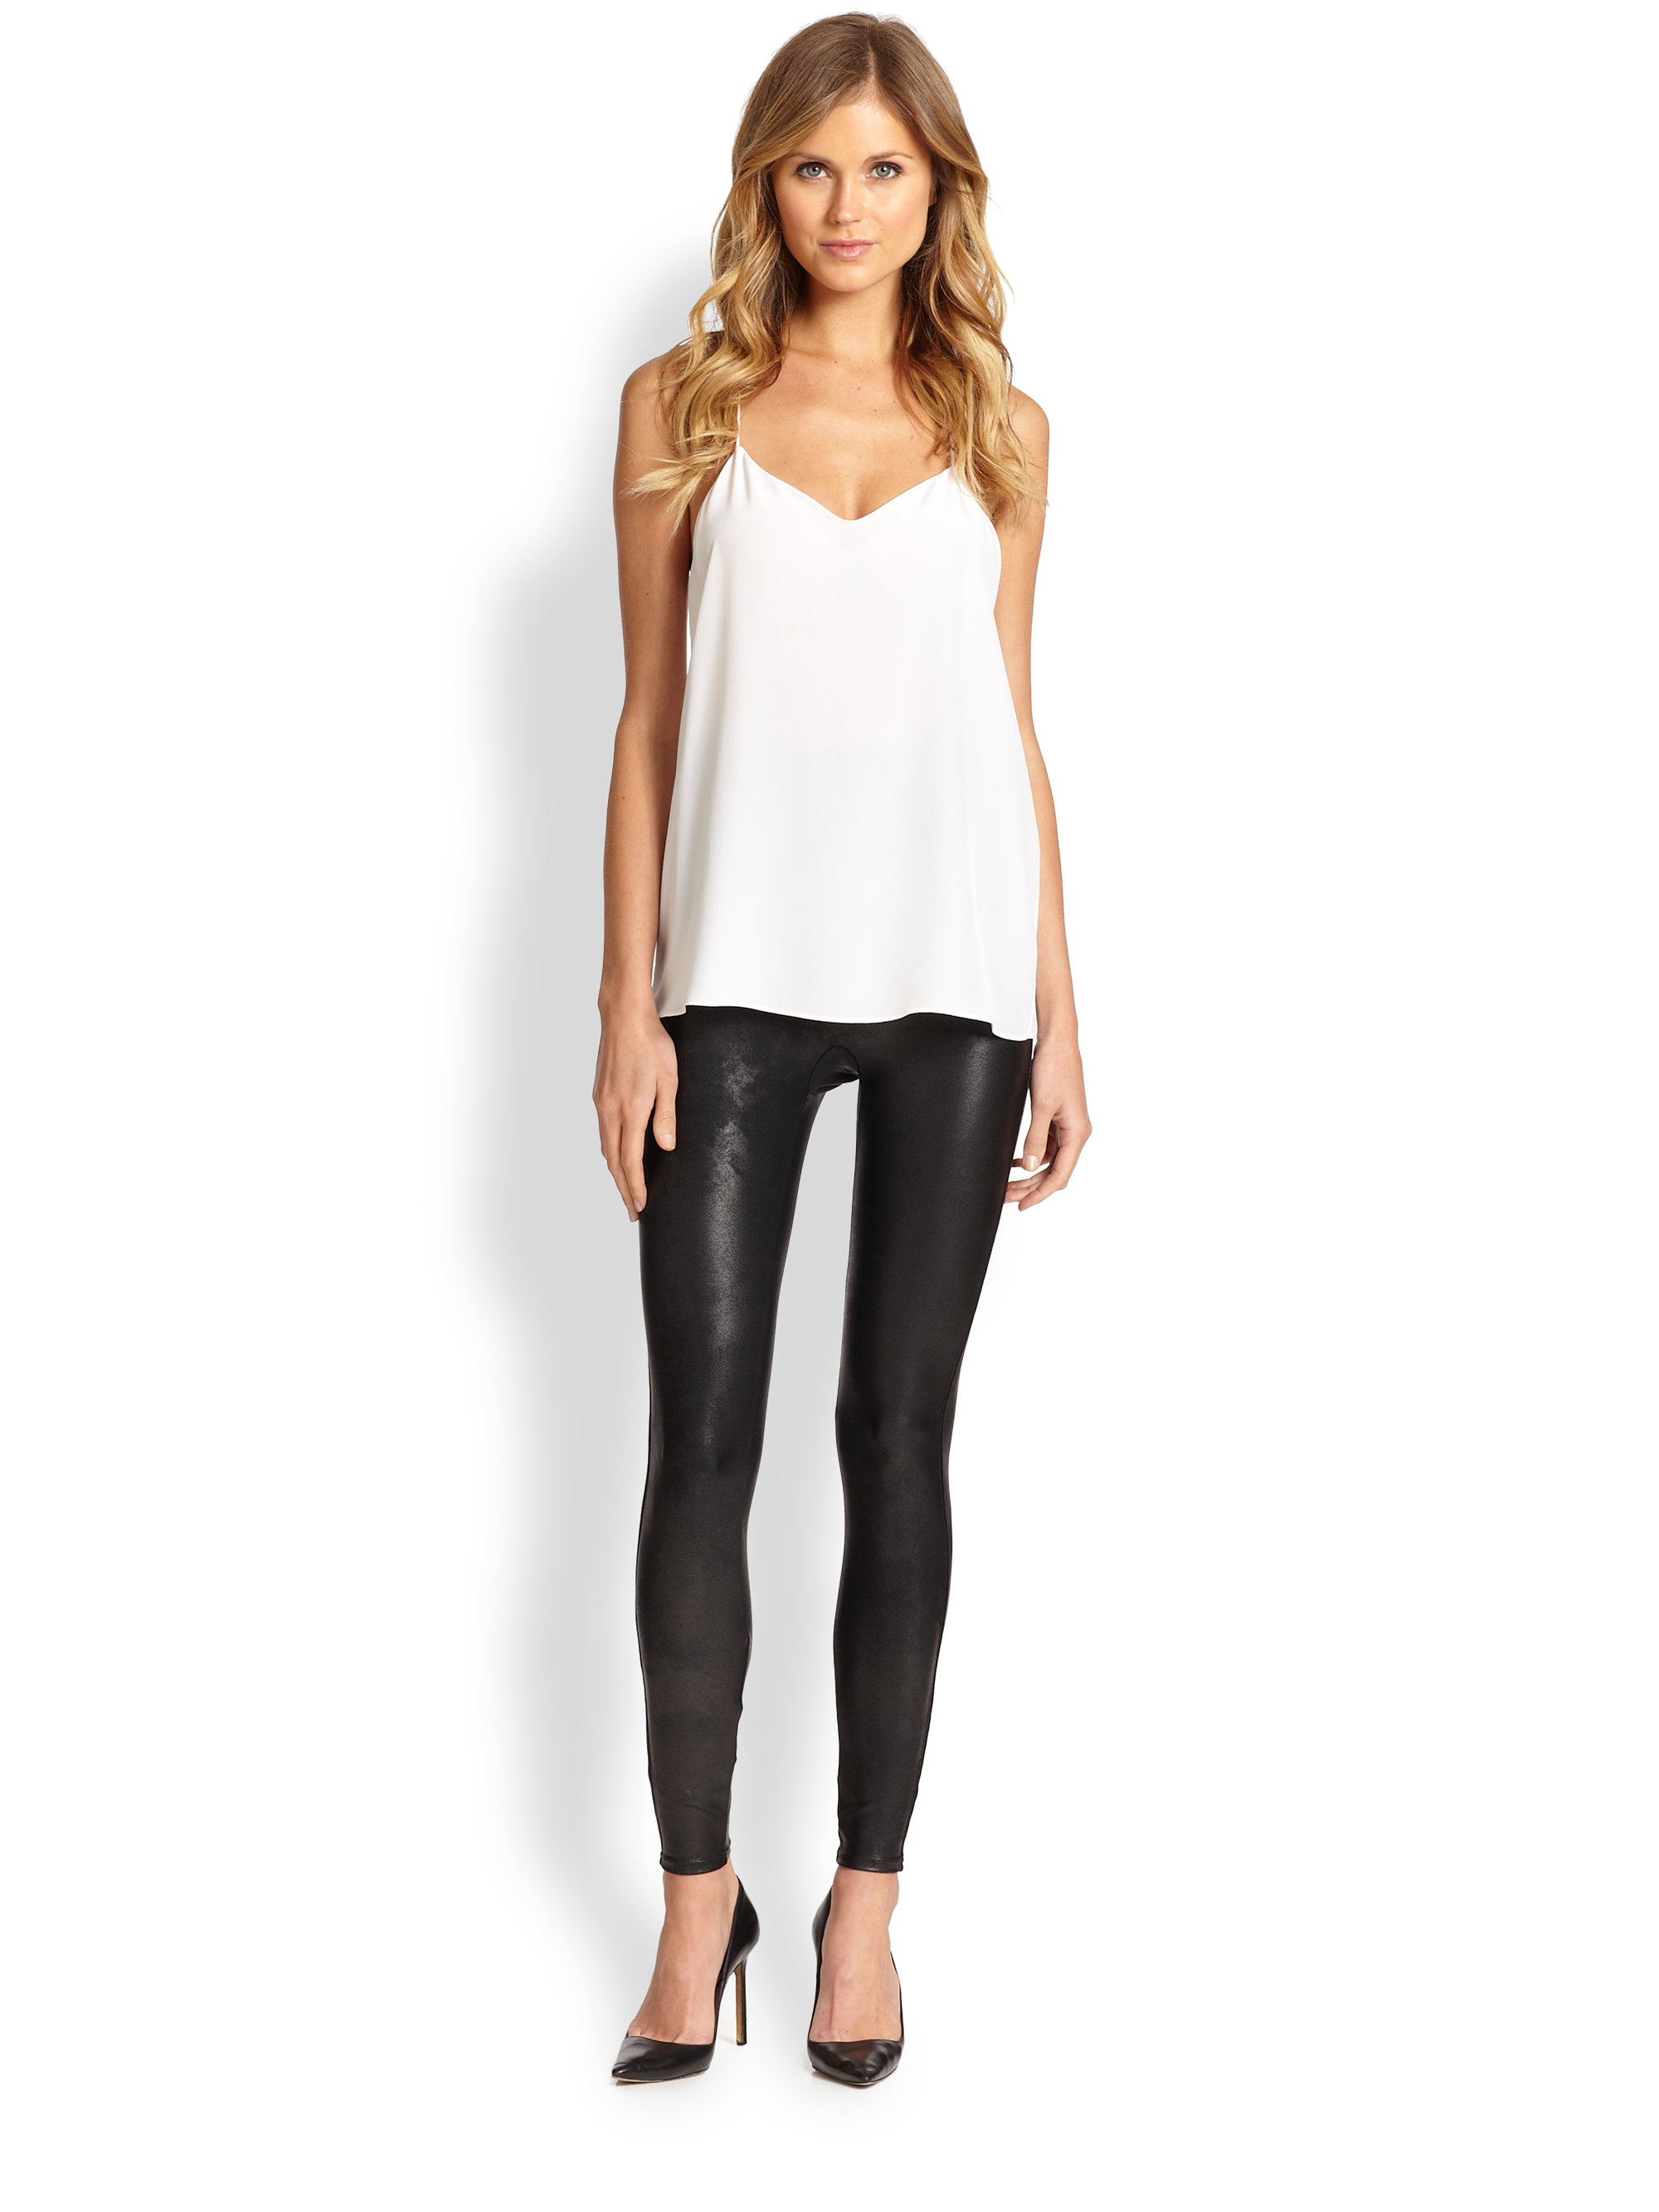 Lyst - Spanx Faux Leather Shaping Leggings in Black